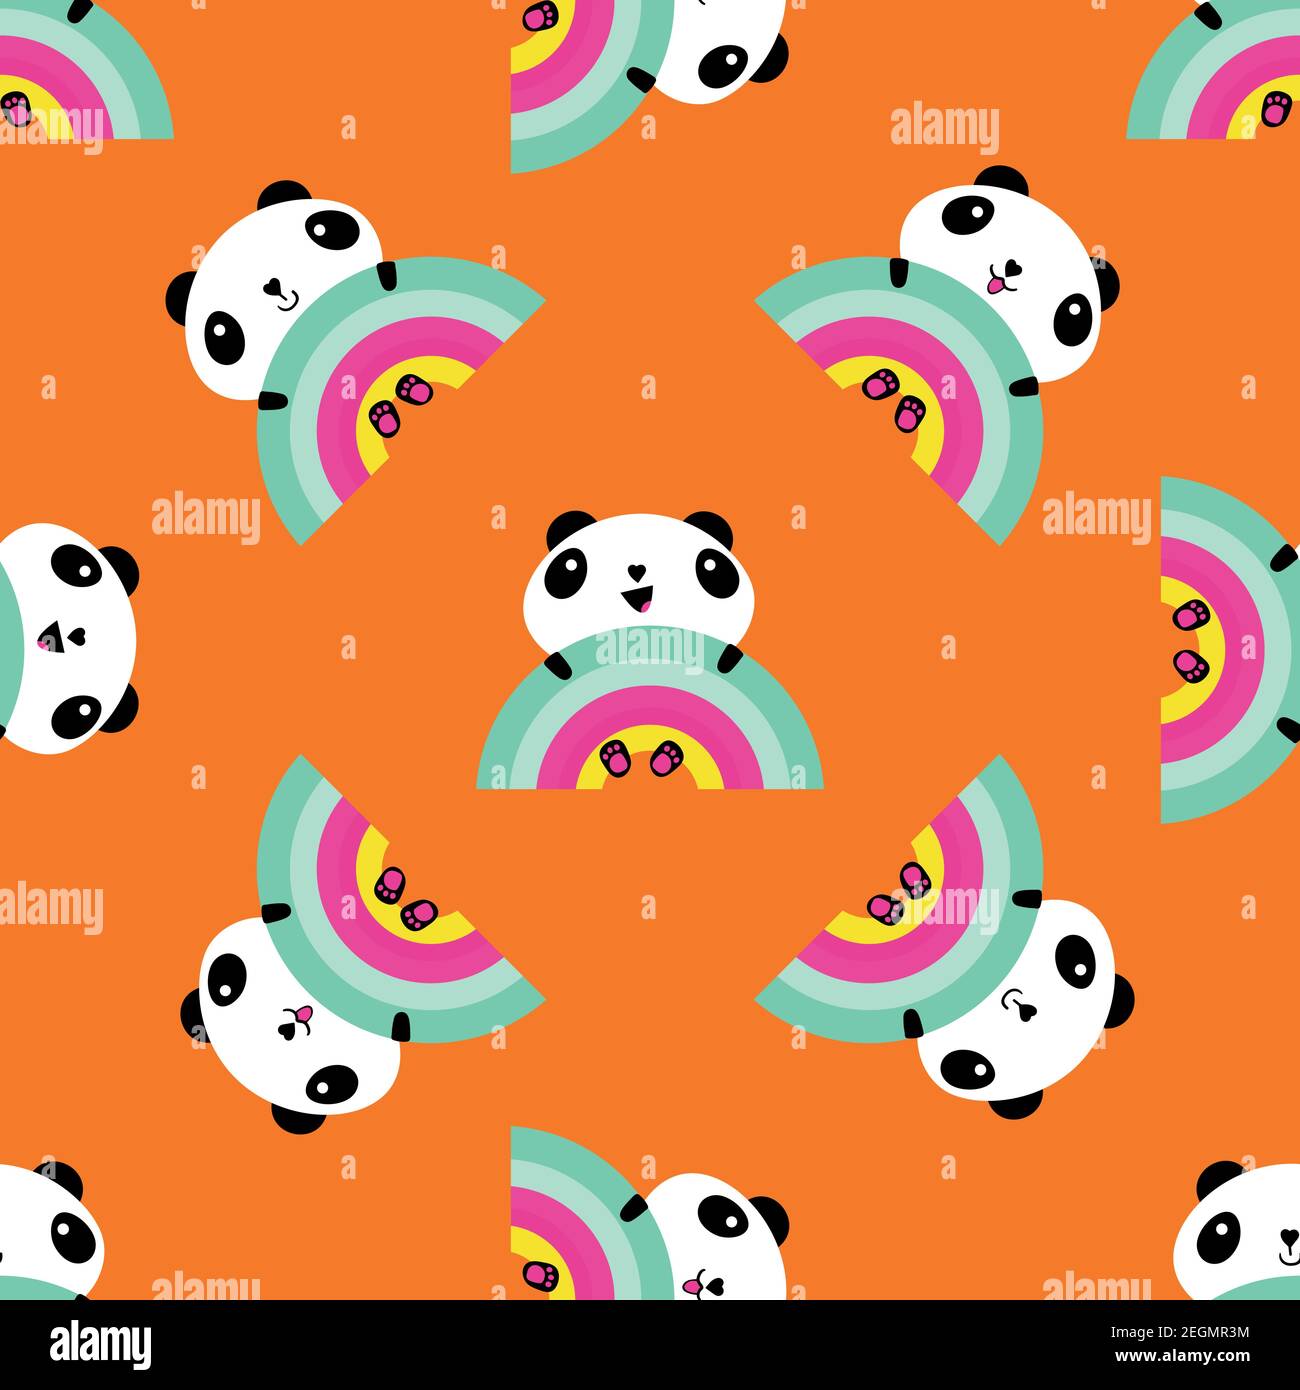 Kawaii panda rainbow seamless vector pattern background. Backdrop with cute black and white sitting cartoon bears holding on to rainbows. Laughing and Stock Vector